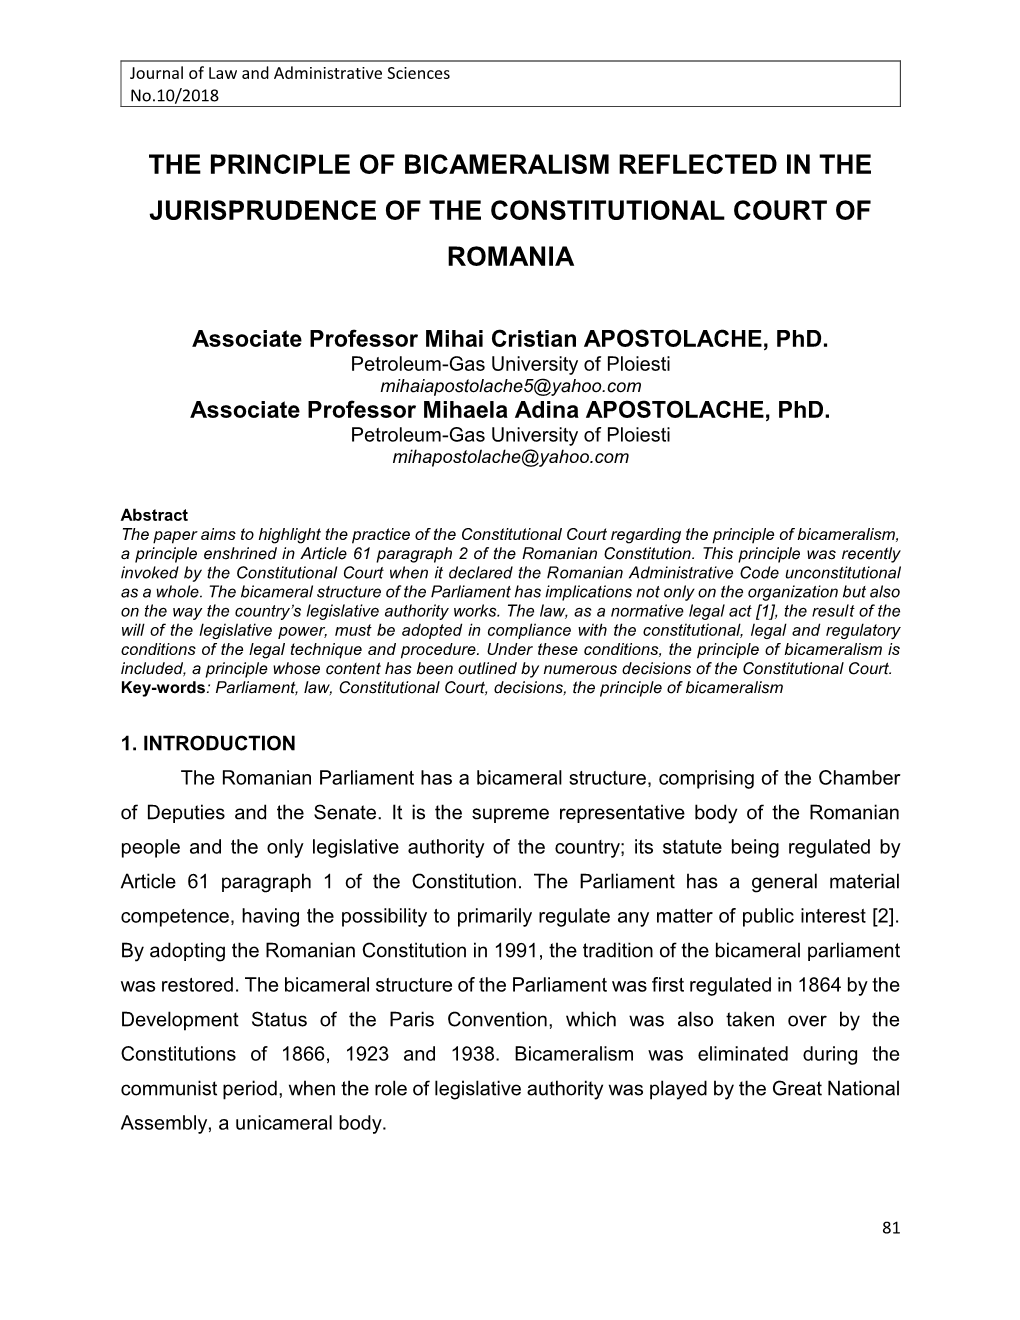 The Principle of Bicameralism Reflected in the Jurisprudence of the Constitutional Court of Romania